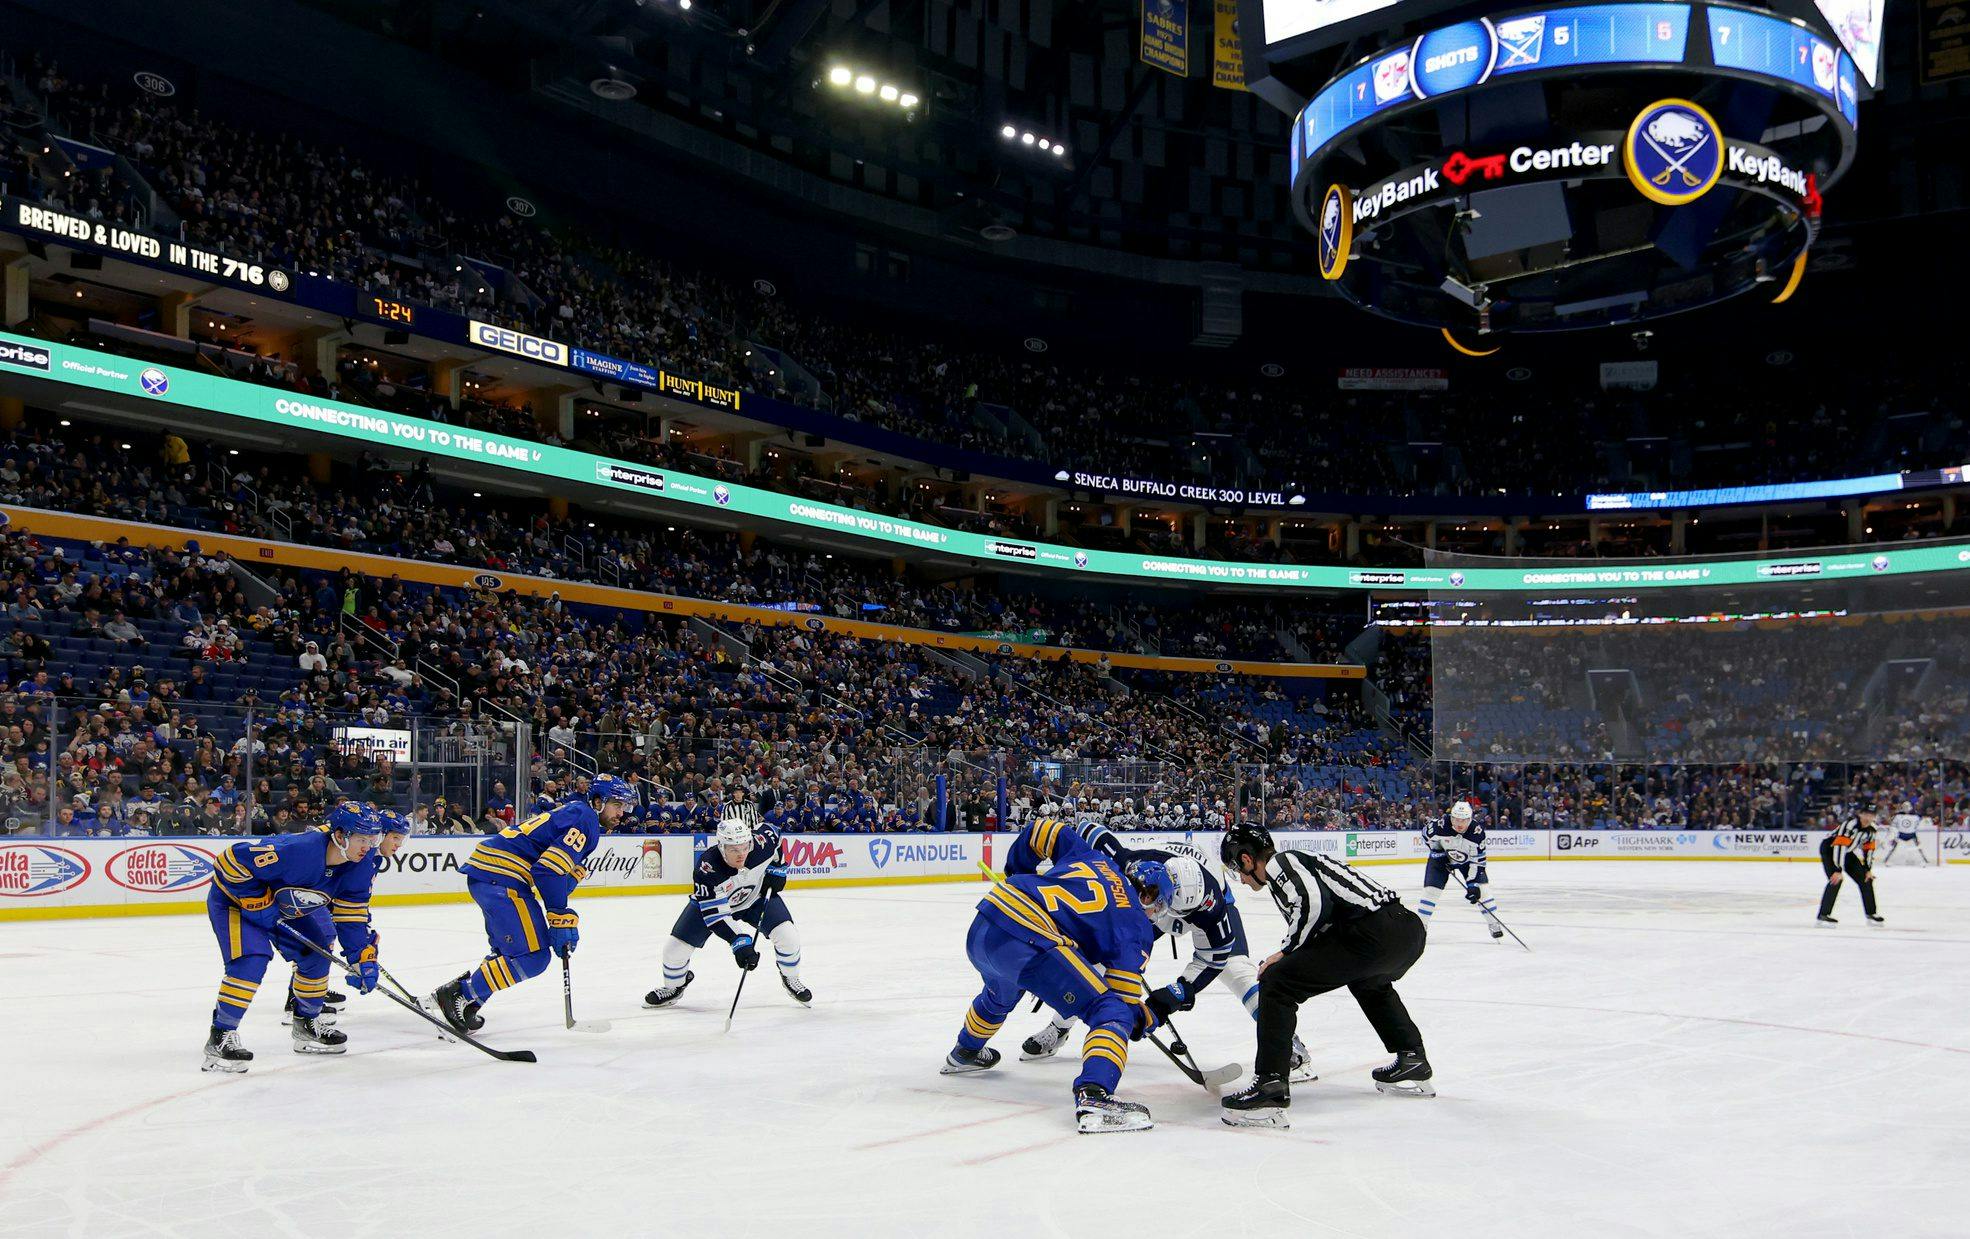 History Lesson! How did the Buffalo Sabres get their name?